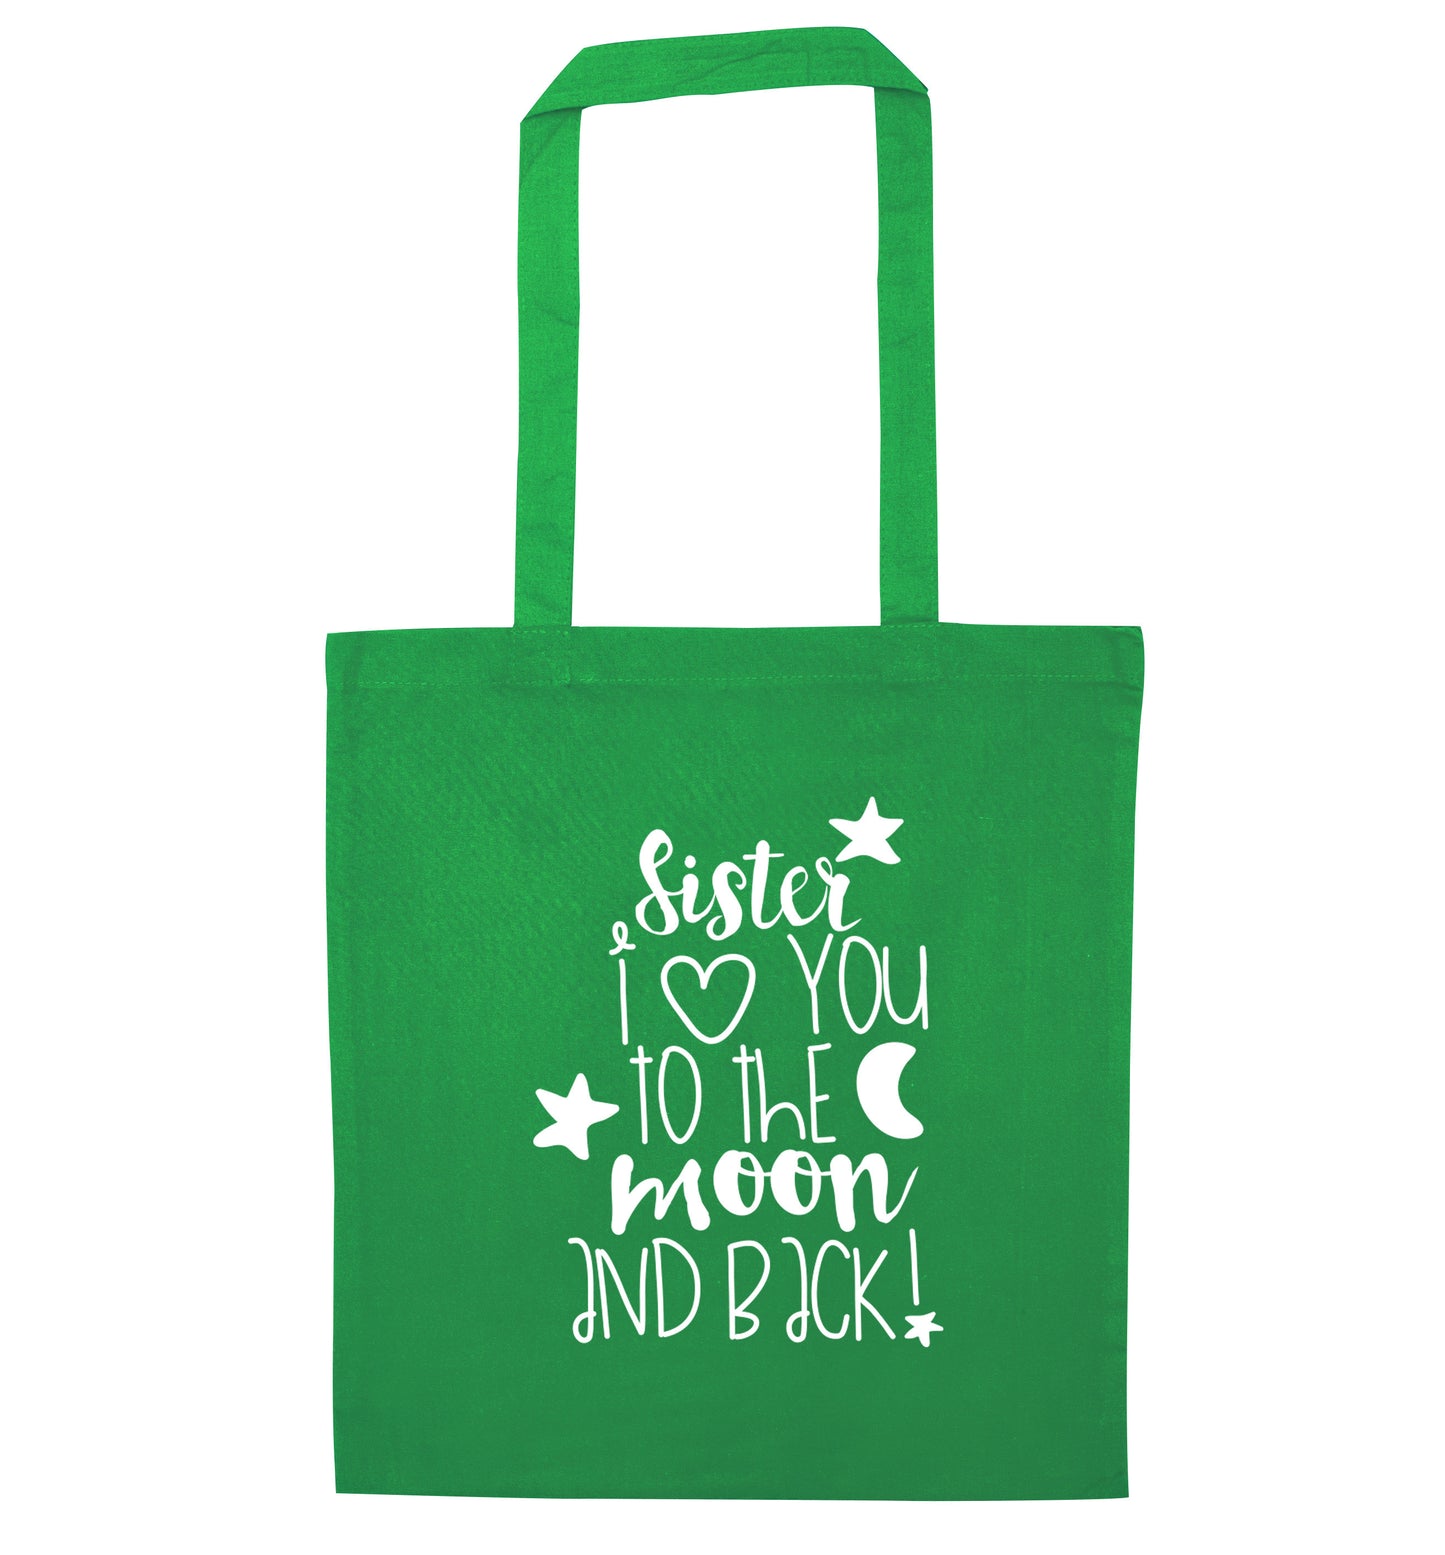 Sister I love you to the moon and back green tote bag